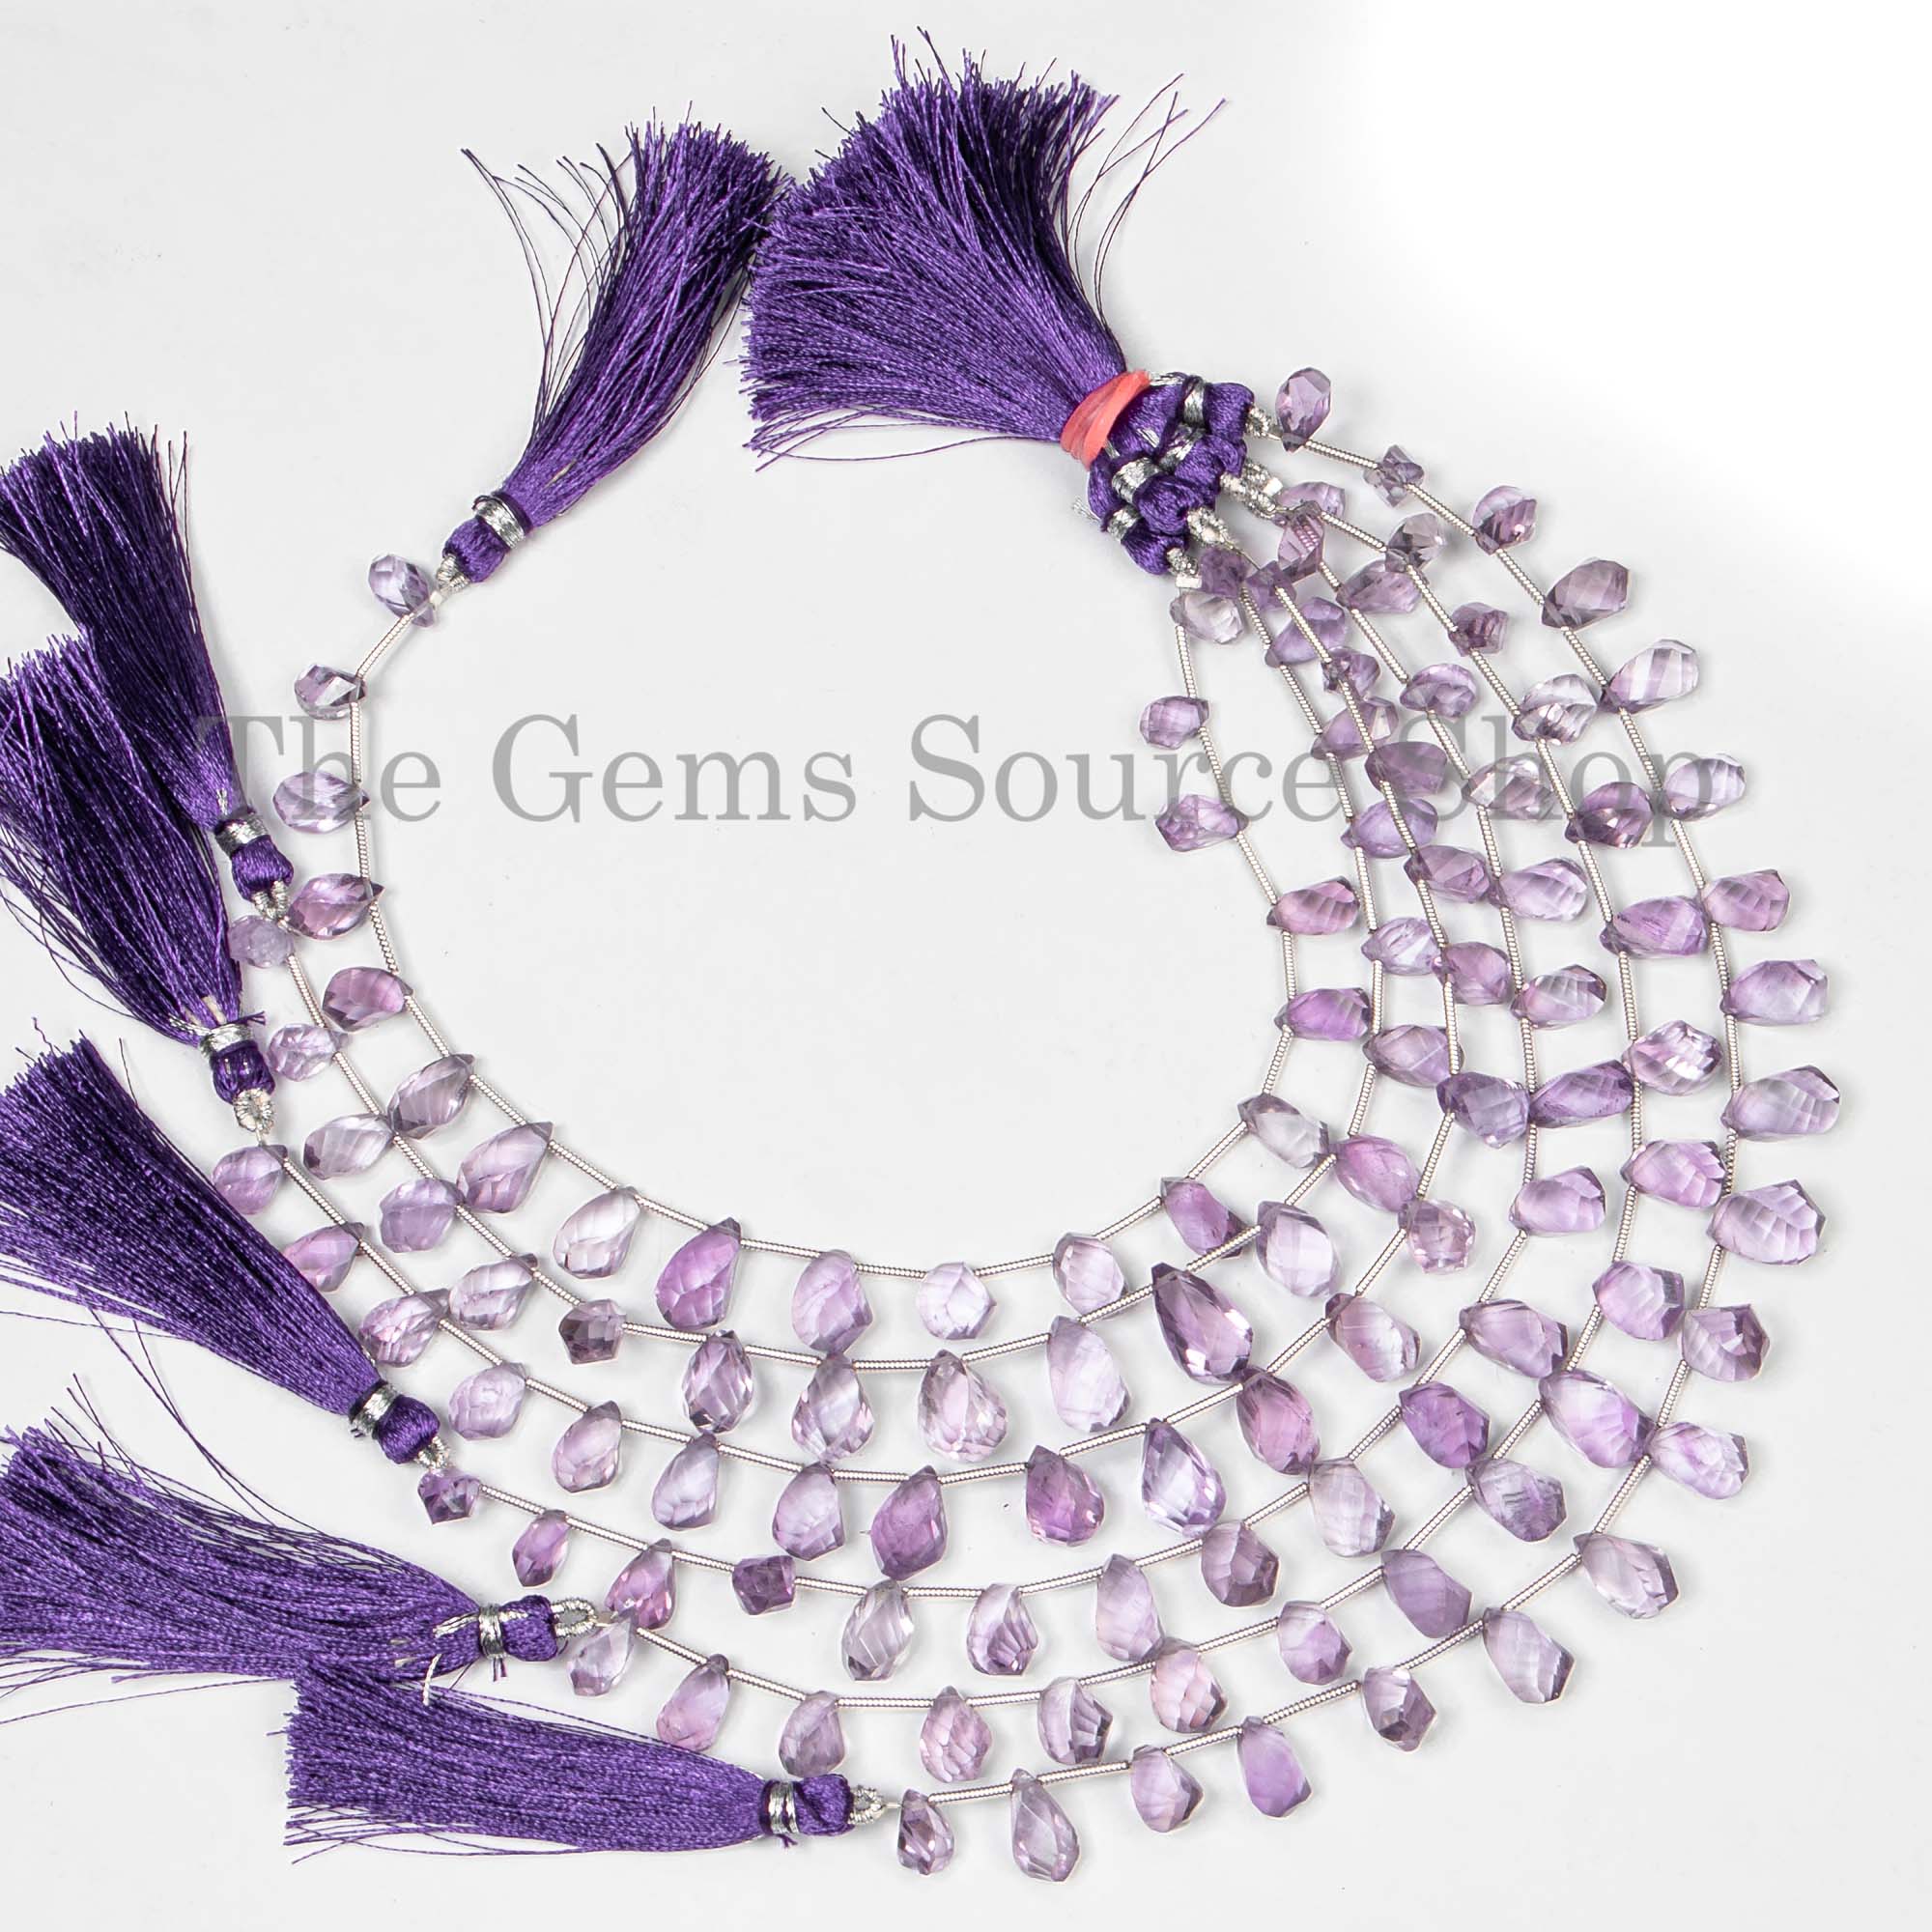 Amethyst Beads, Amethyst Twisted Drops Beads, Fancy Beads, Amethyst, Faceted Beads